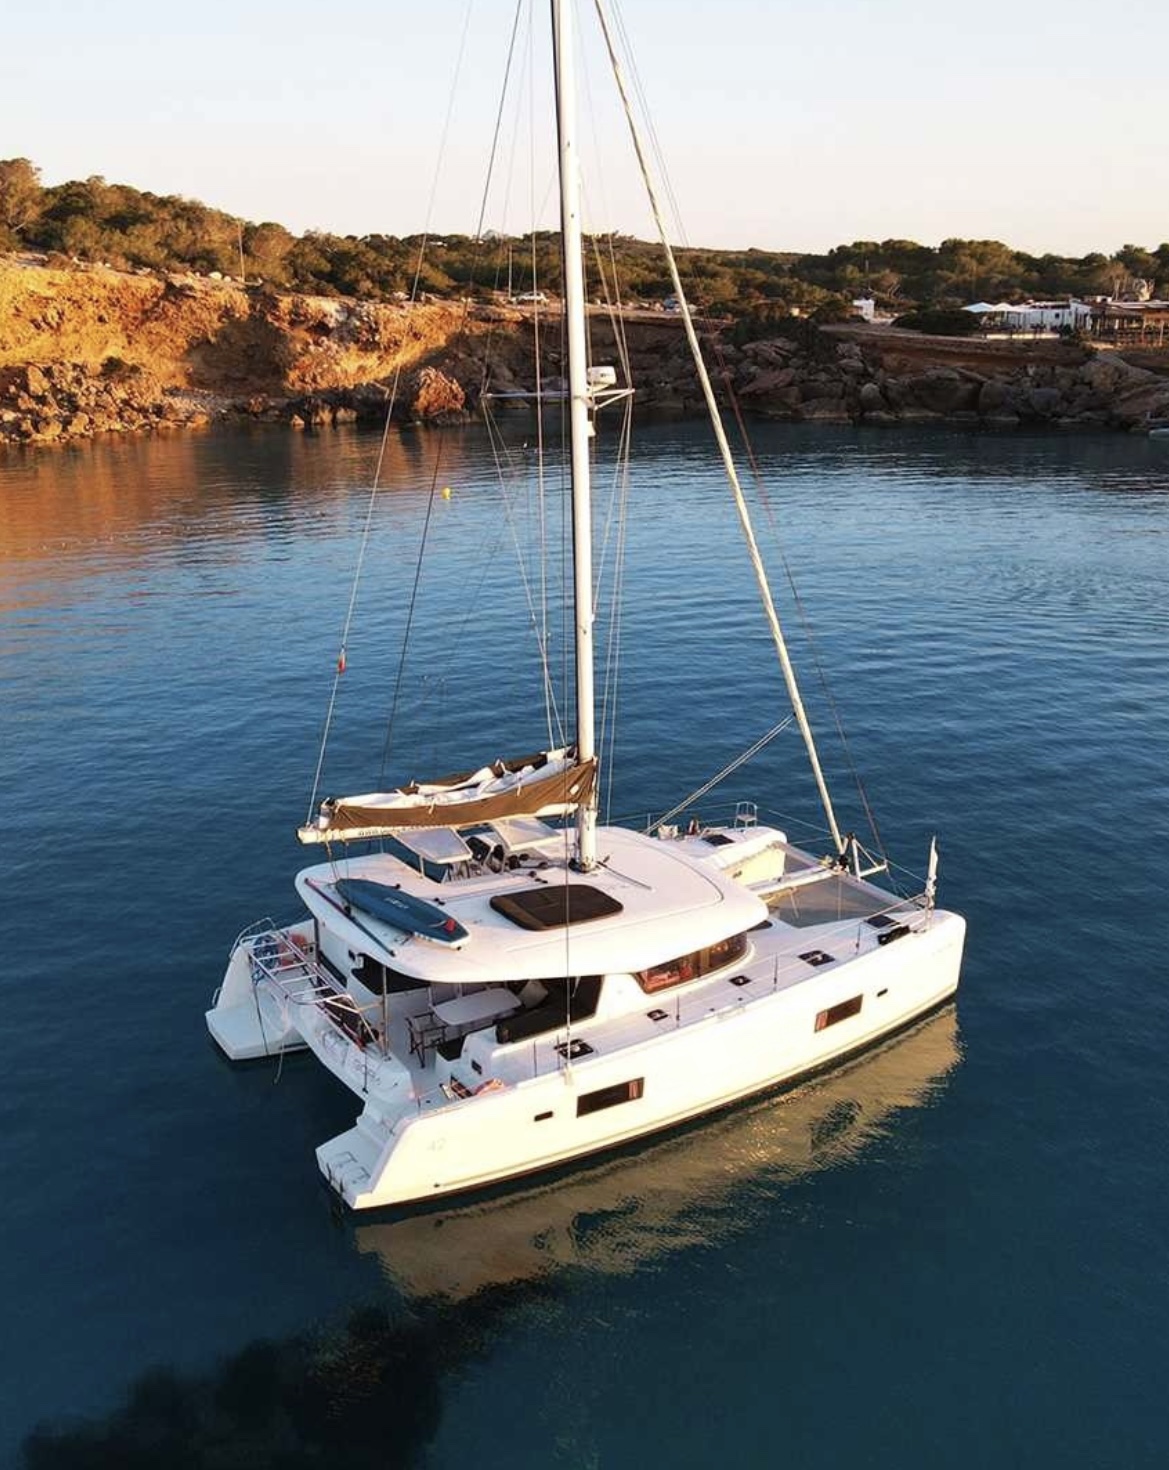 Dive into our Water Activities onboard our Catamarans!